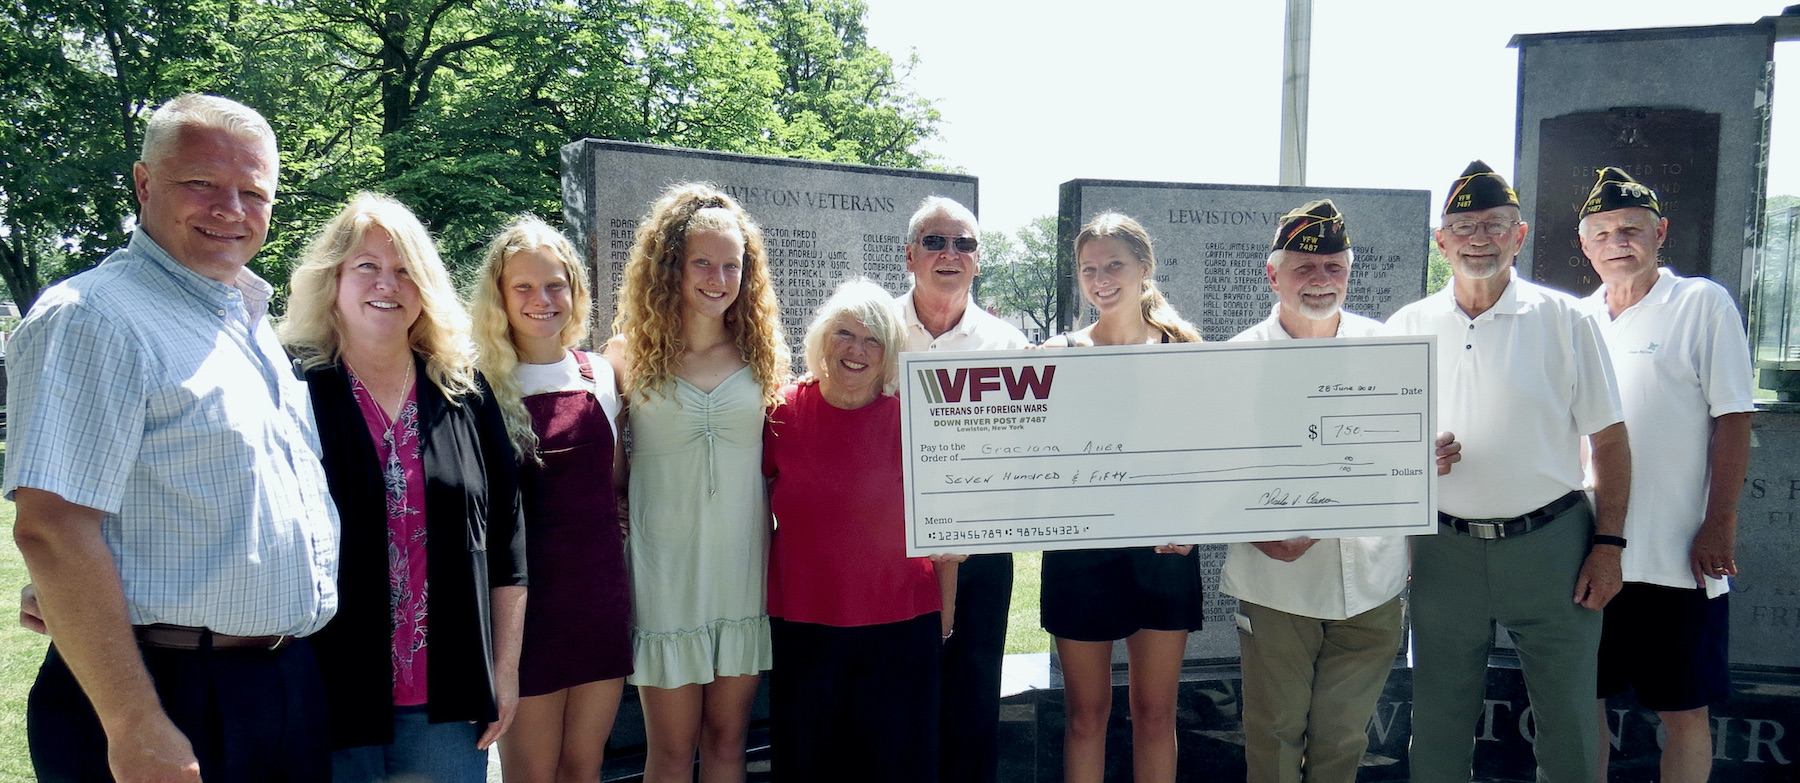 Pictured, from left, Andrew, Lisa, Alyssa and Sophie Auer; Leslie and Tom Dugan; Graciana Auer; VFW Cmdr. Gordon Spencer and VFW members Bruce Sutherland and Bill Justyk.